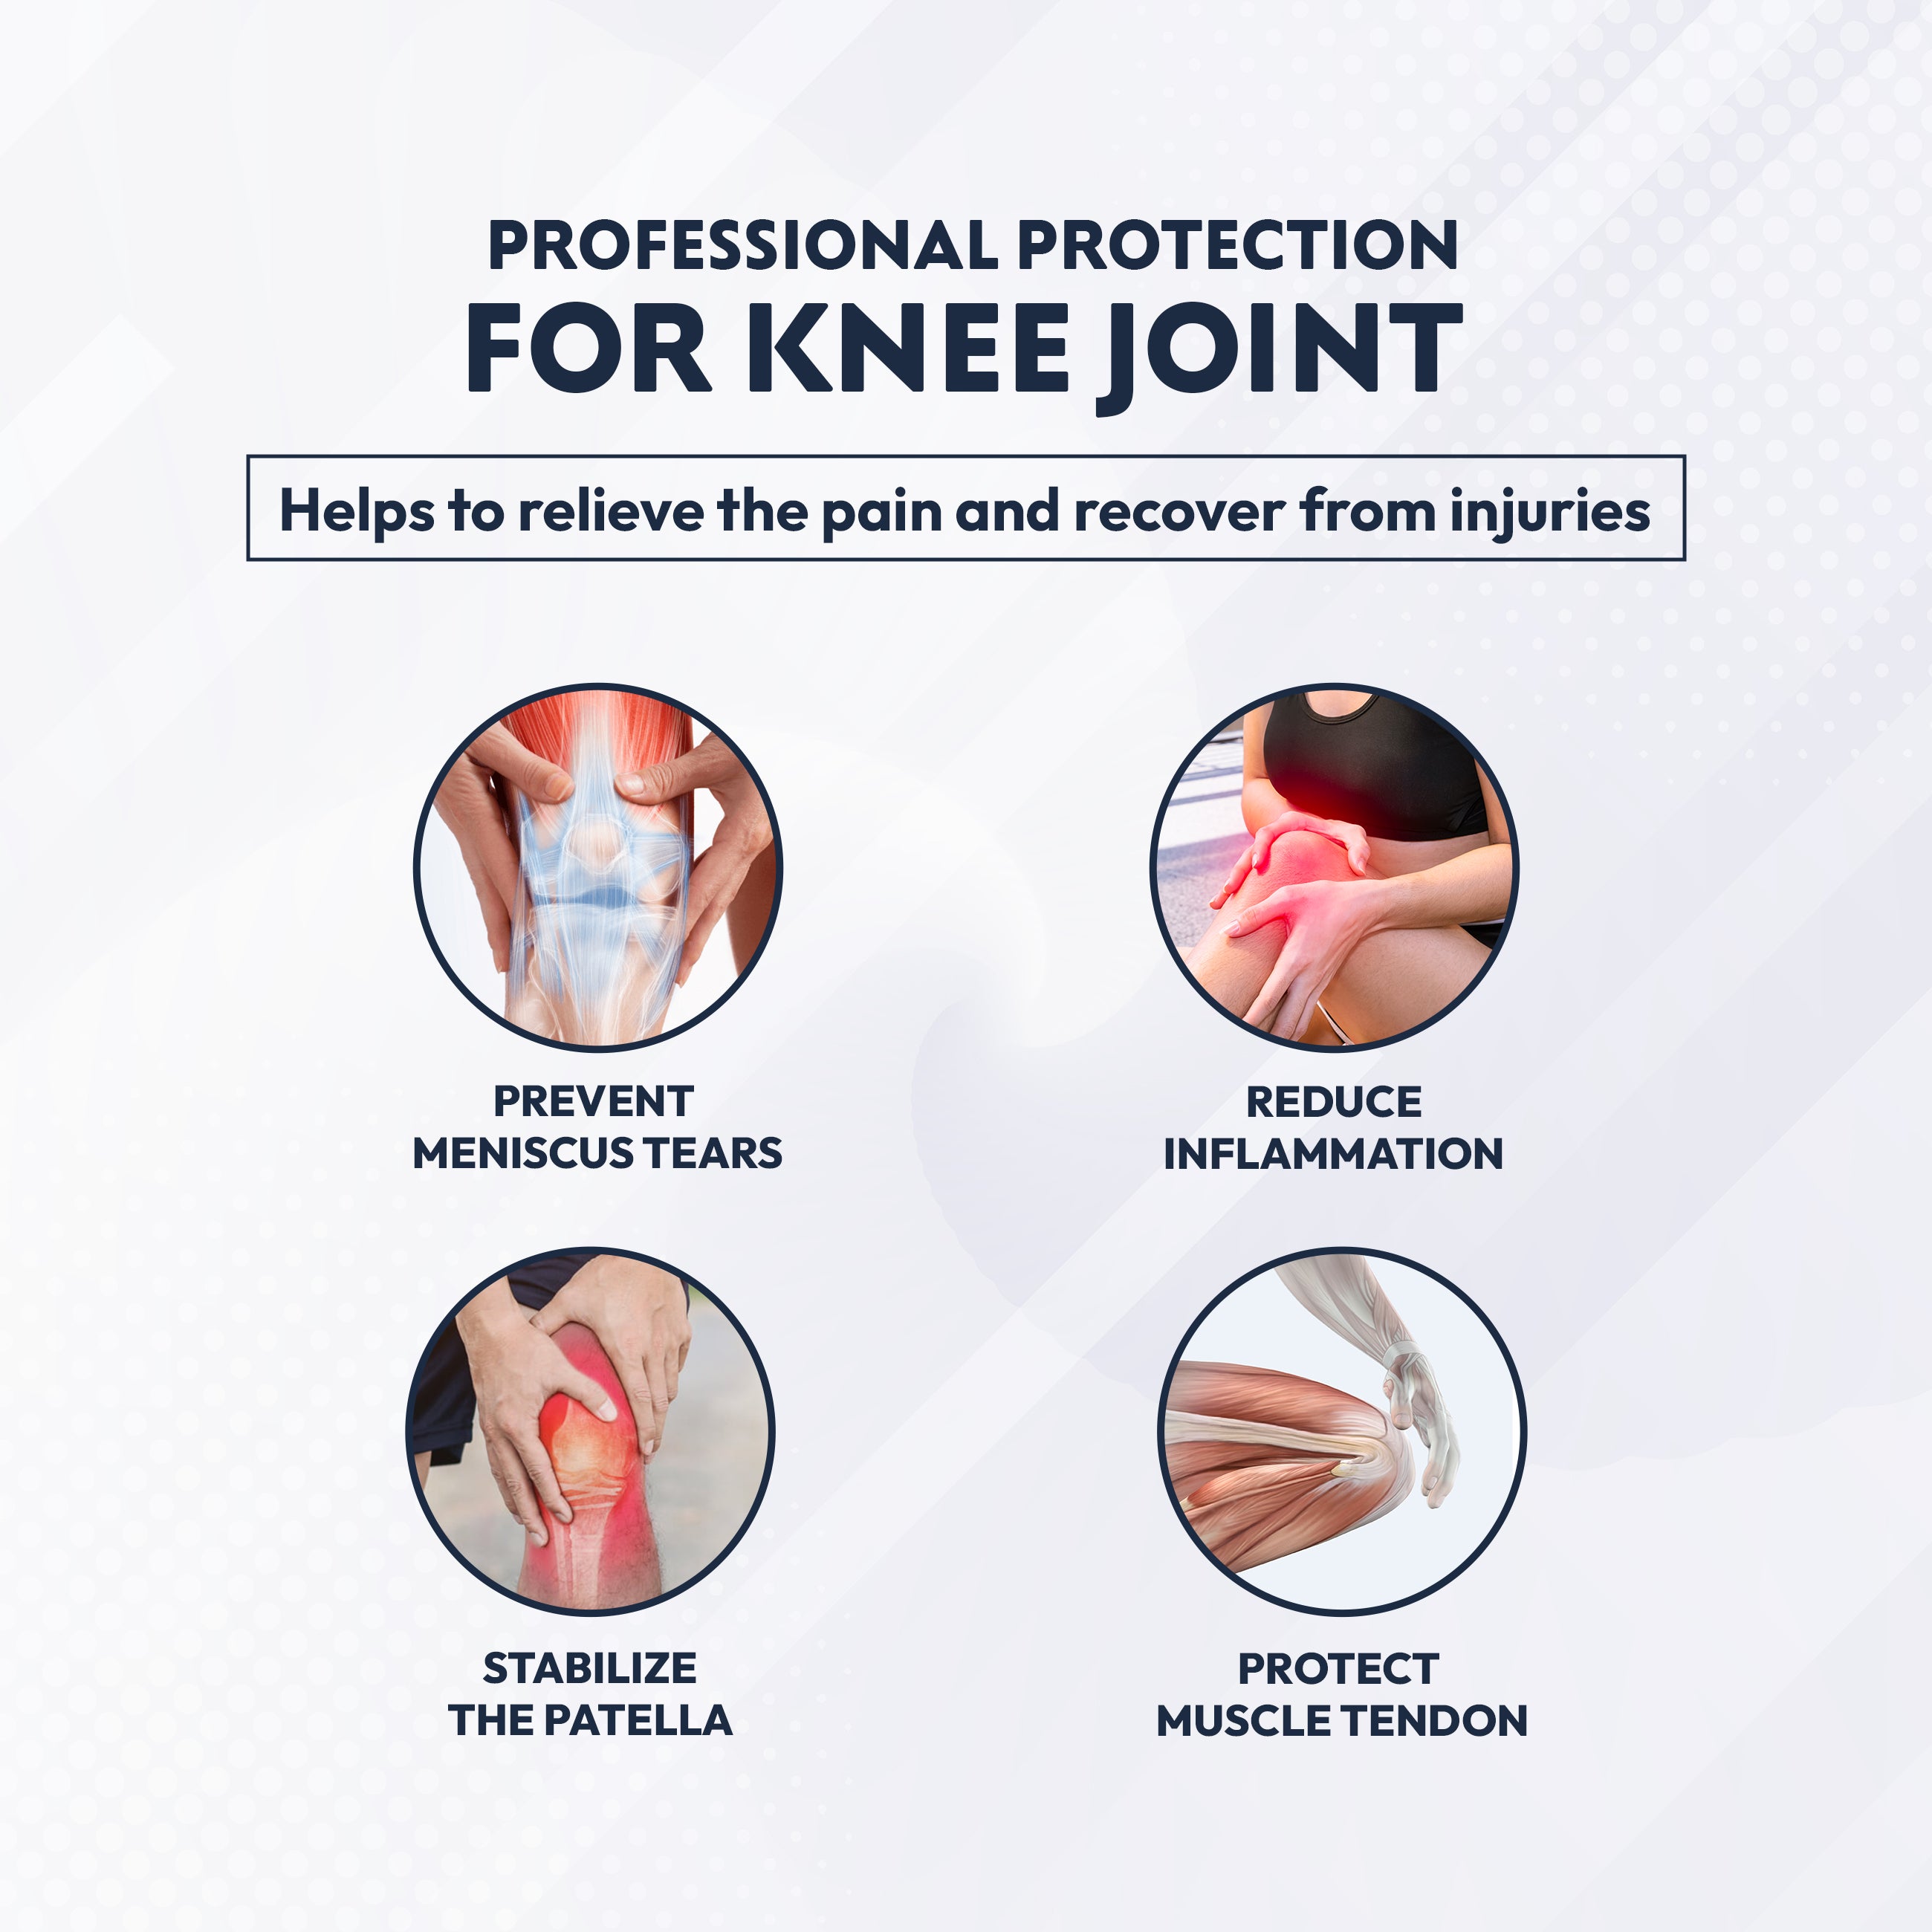 I5Joints Gel-Pro 101Knee Support Protector(Knee Brace,Knee Compression Sleeve Support with Patella Gel Pad & Side Spring Stabilizers,Medical Grade Knee Protector for Running,Meniscus Tear,Arthritis,Joint Pain Relief,ACL,Injury Recovery)